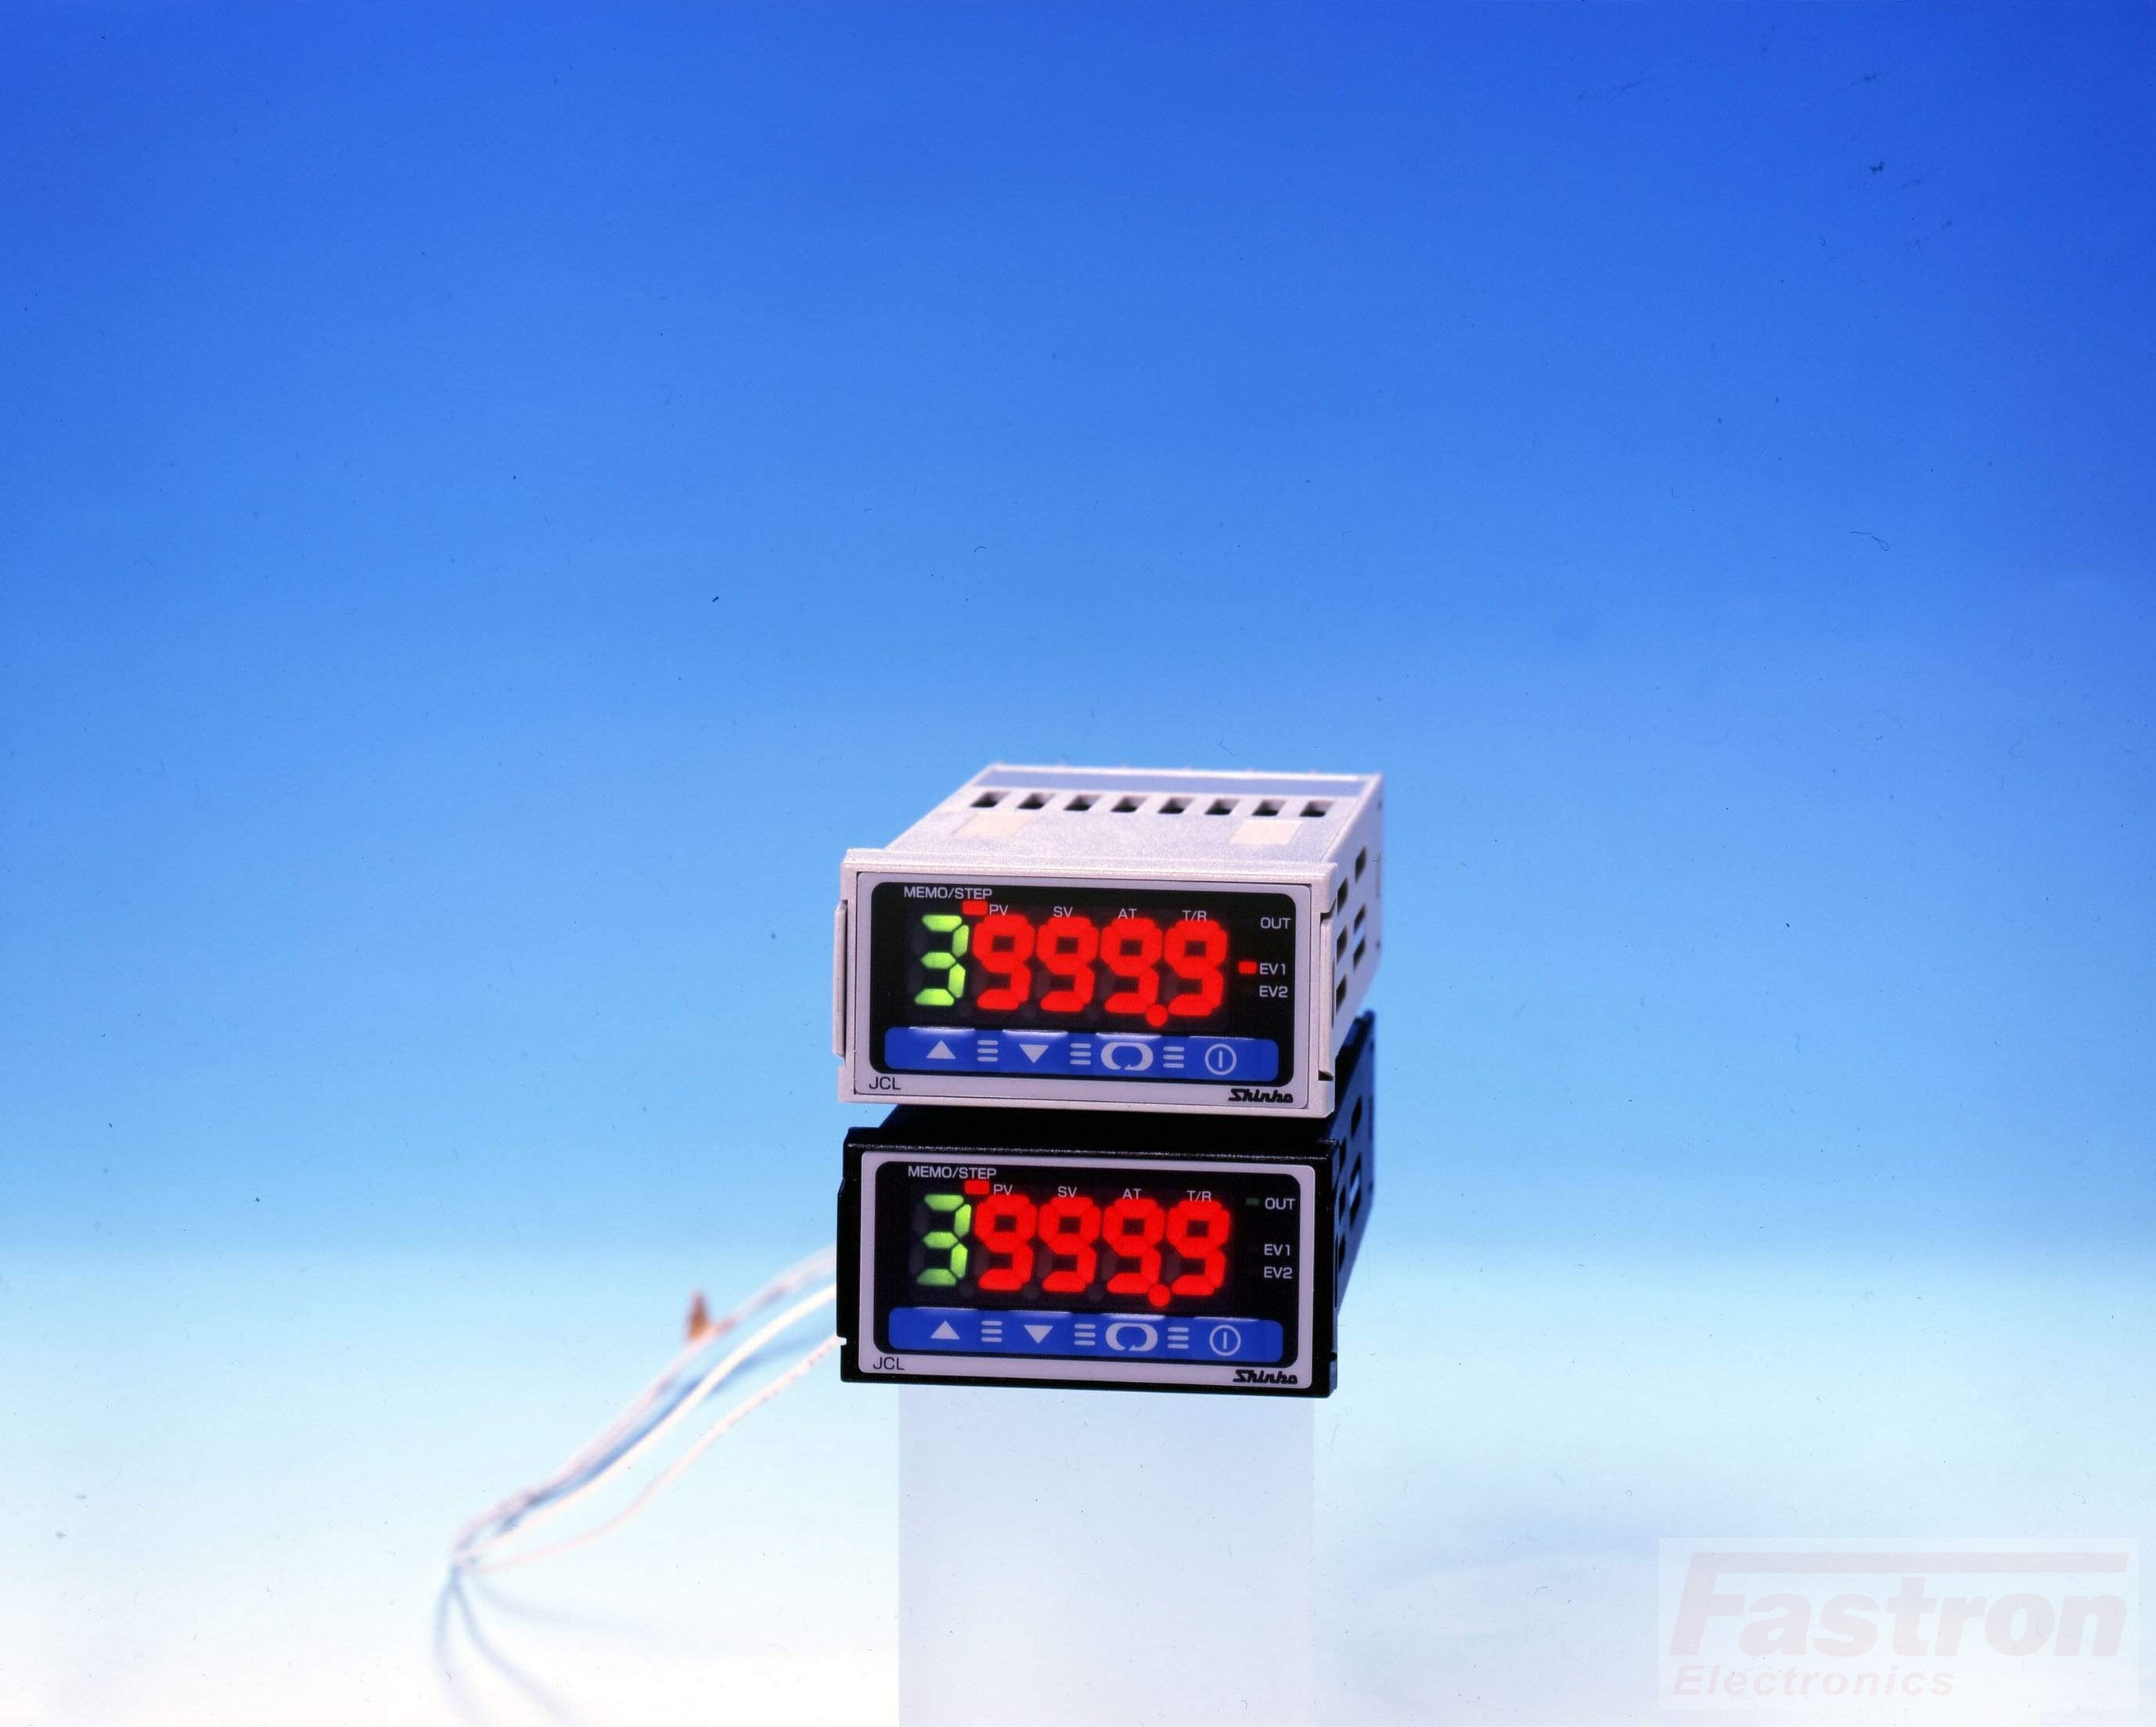 JCL33AA/M1 Temperature Controller, 48x24mm, 24VAC/DC, 4-20mA output, 9 step pattern